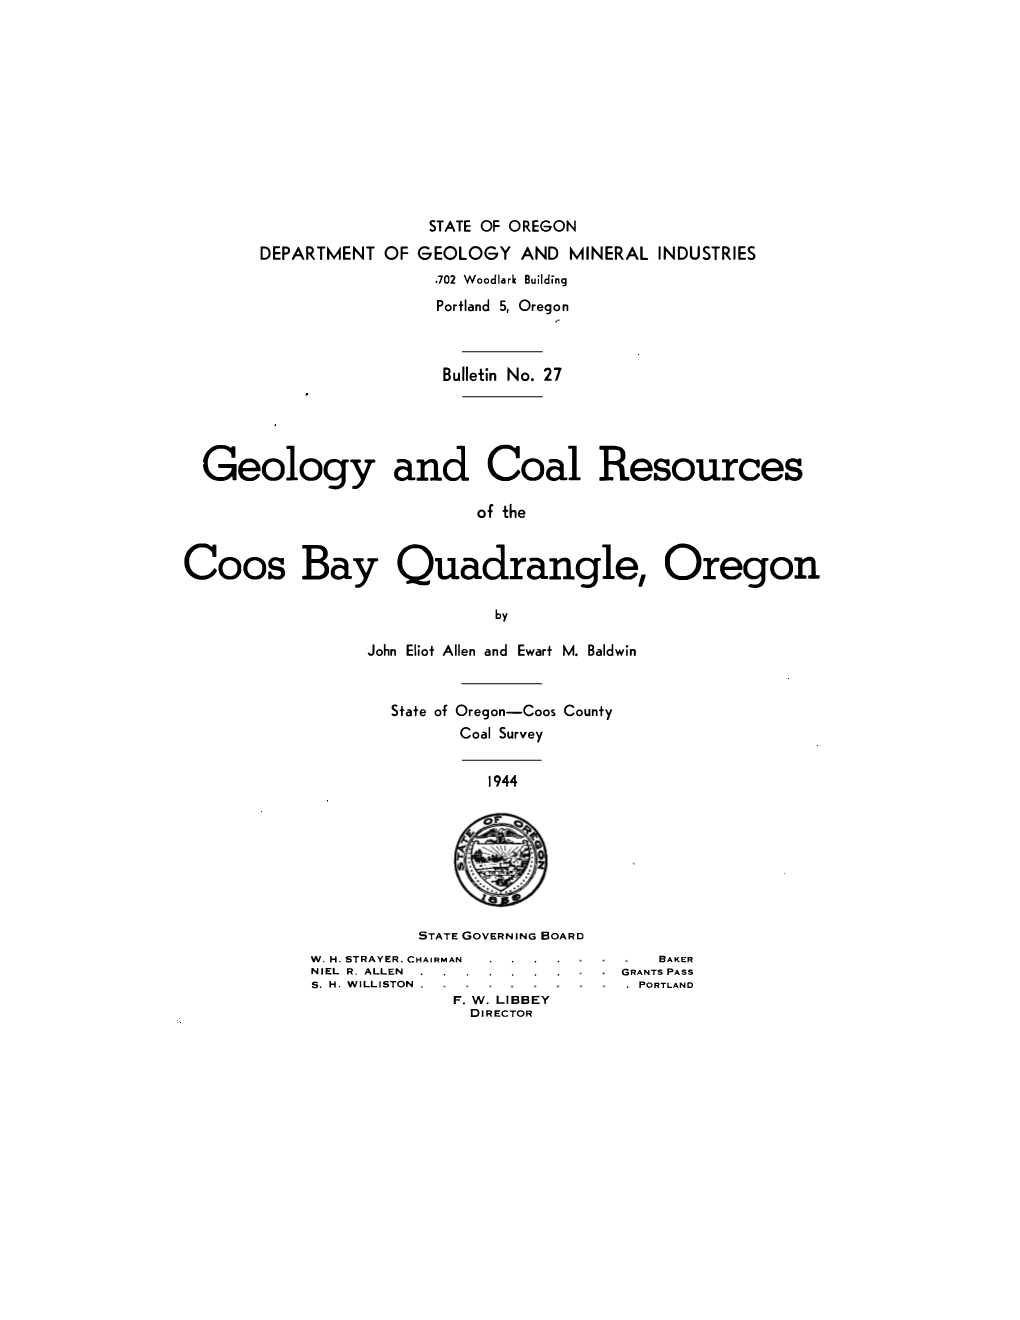 Geology and Coal Resources of the Coos Bay Quadrangle, Oregon